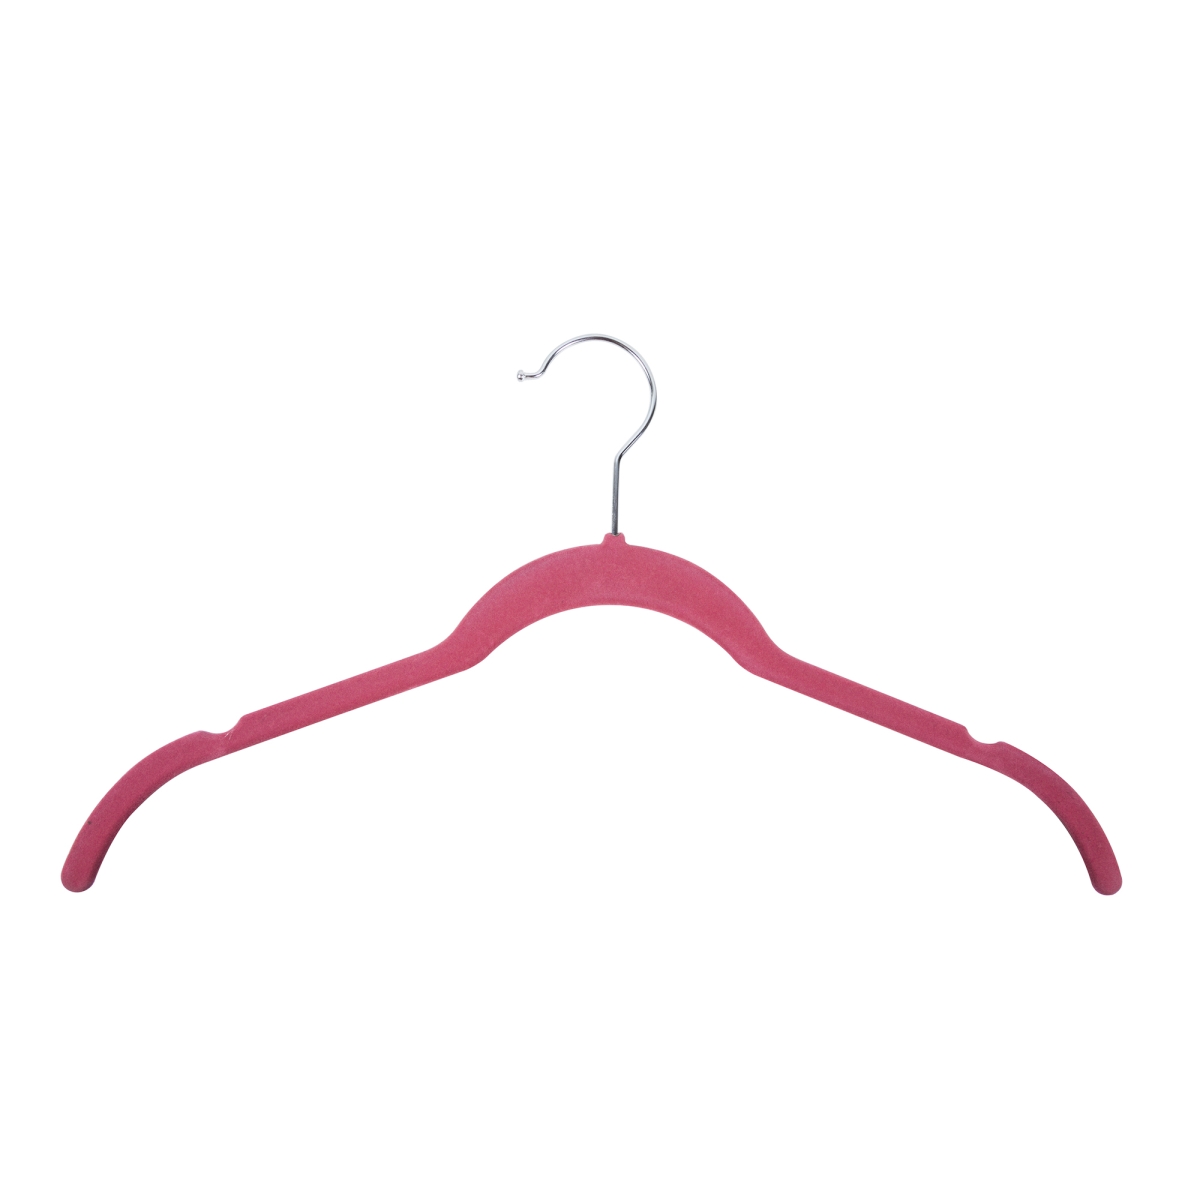 Shirt & Blouse Hanger With Notches Pink - Flocked Velvet Pack Of 50